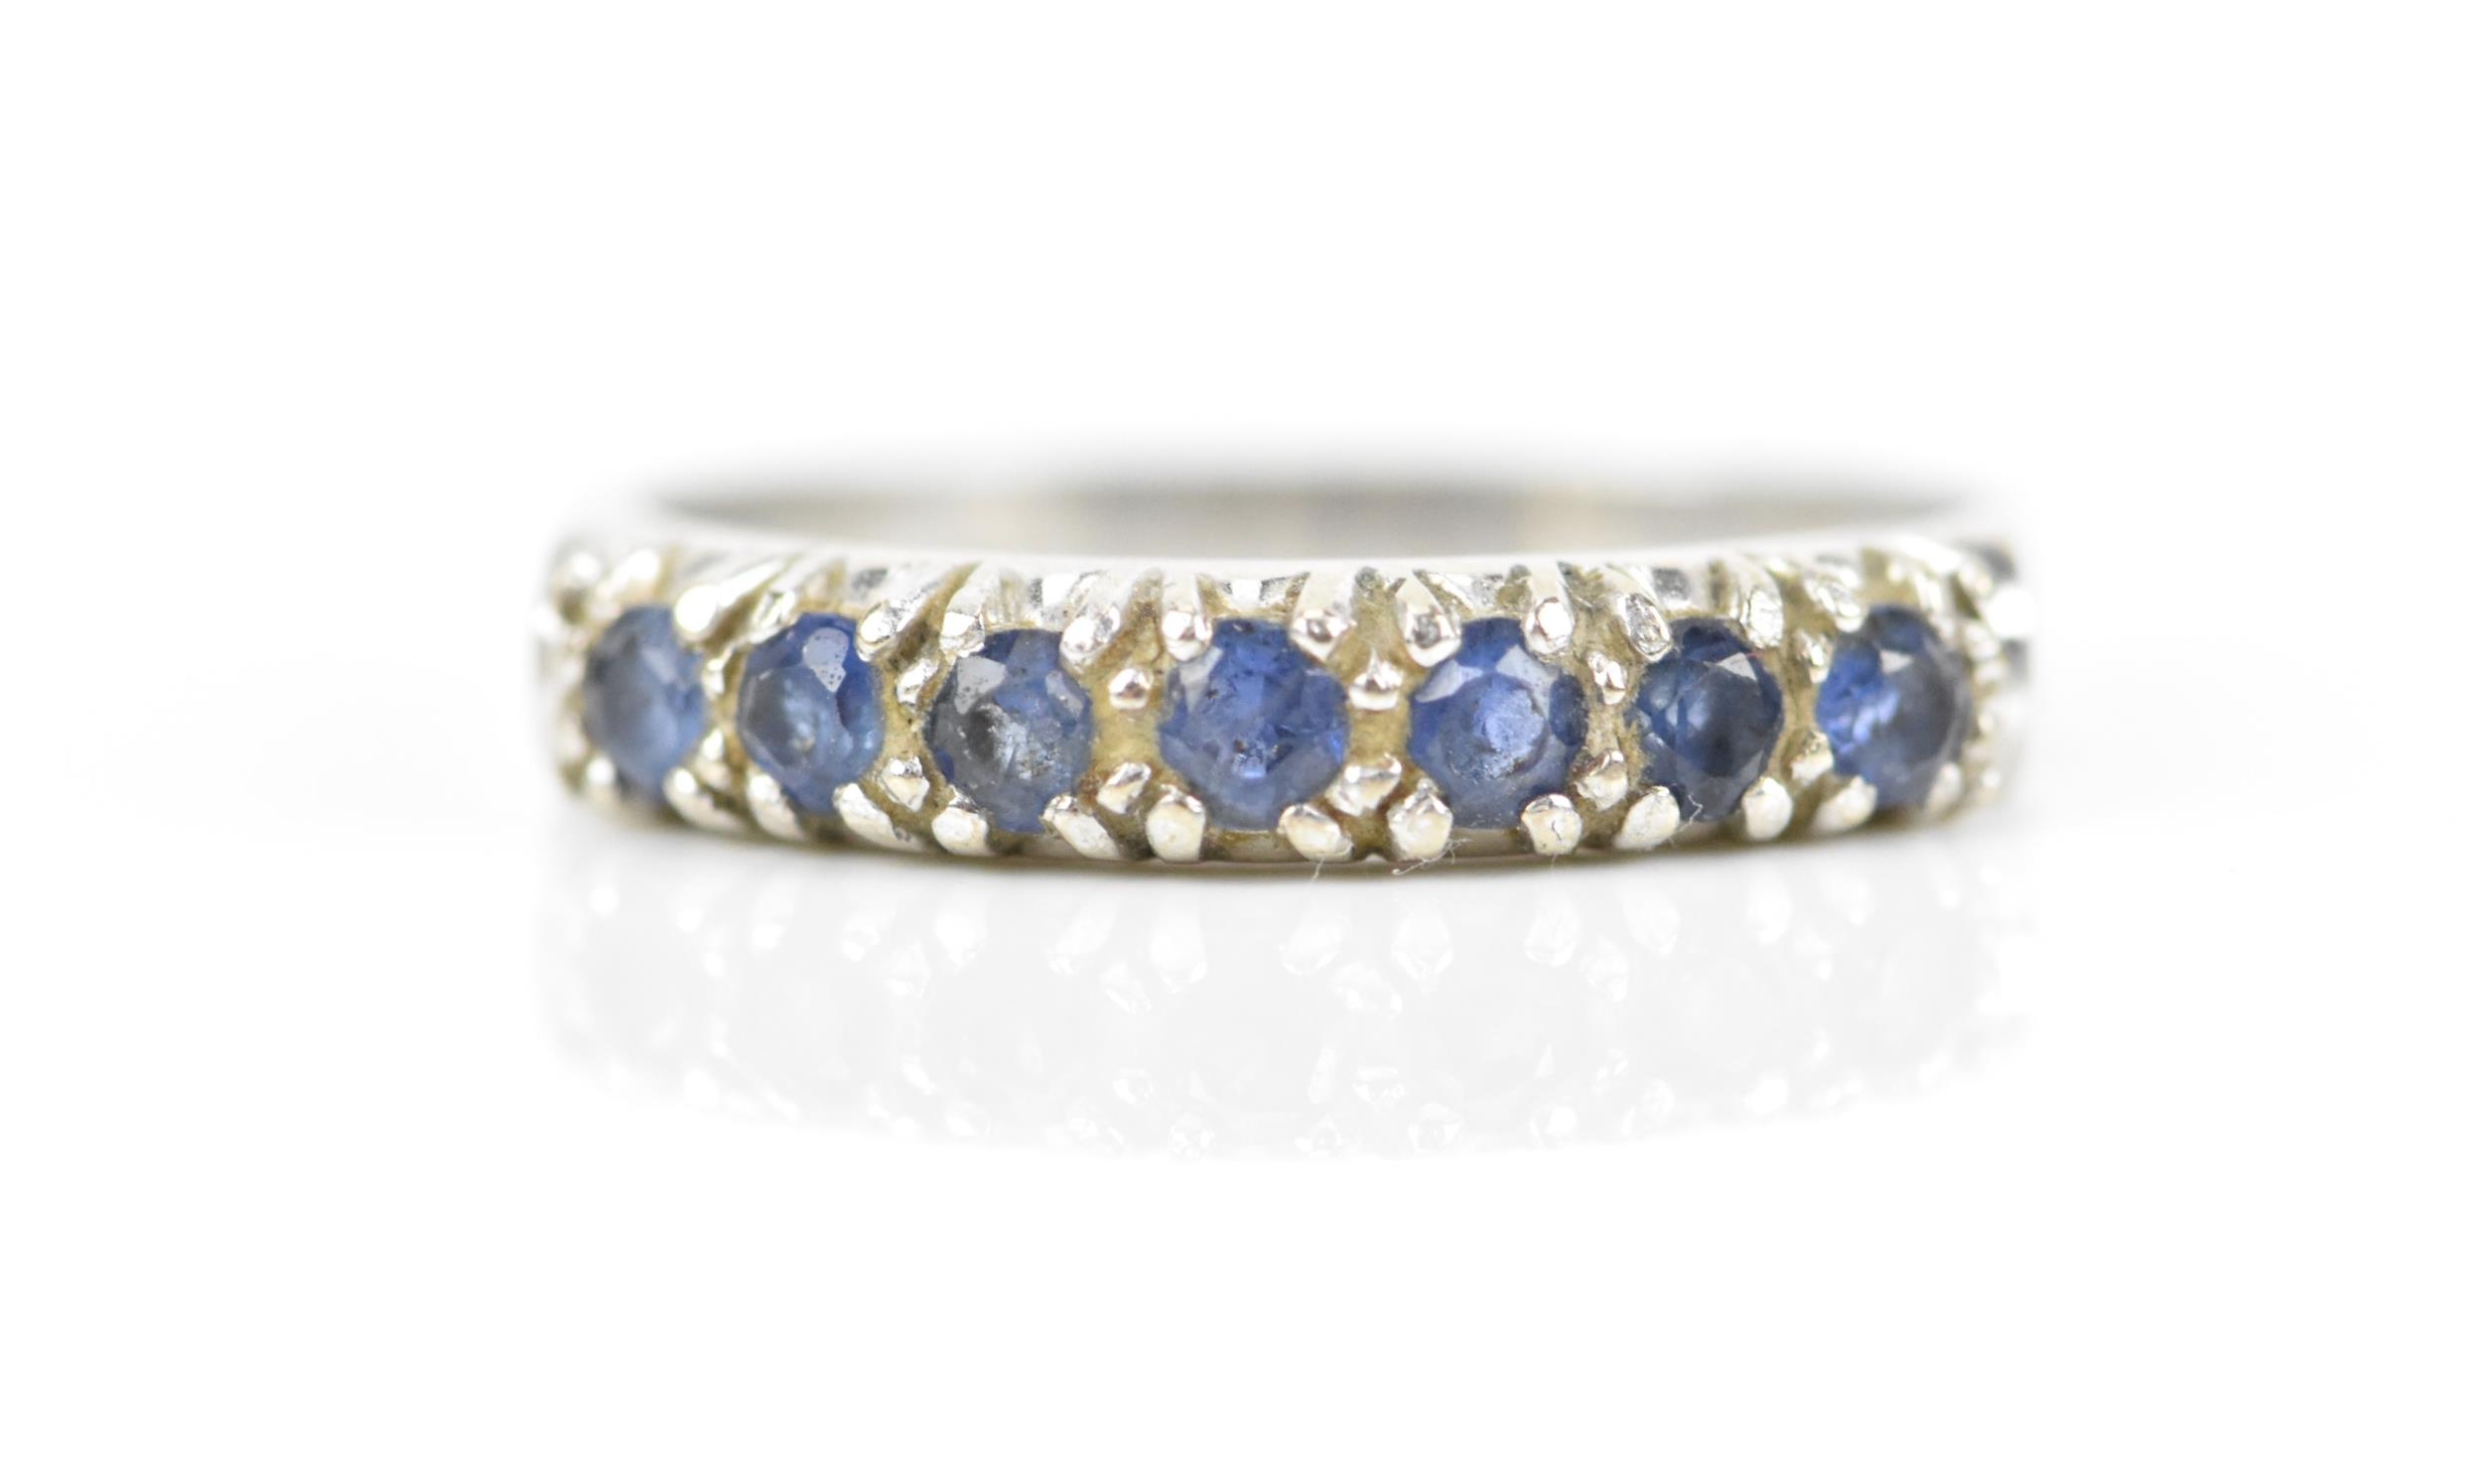 A 9ct white gold and blue sapphire half eternity ring, set with a row of seven same-sized pave-set